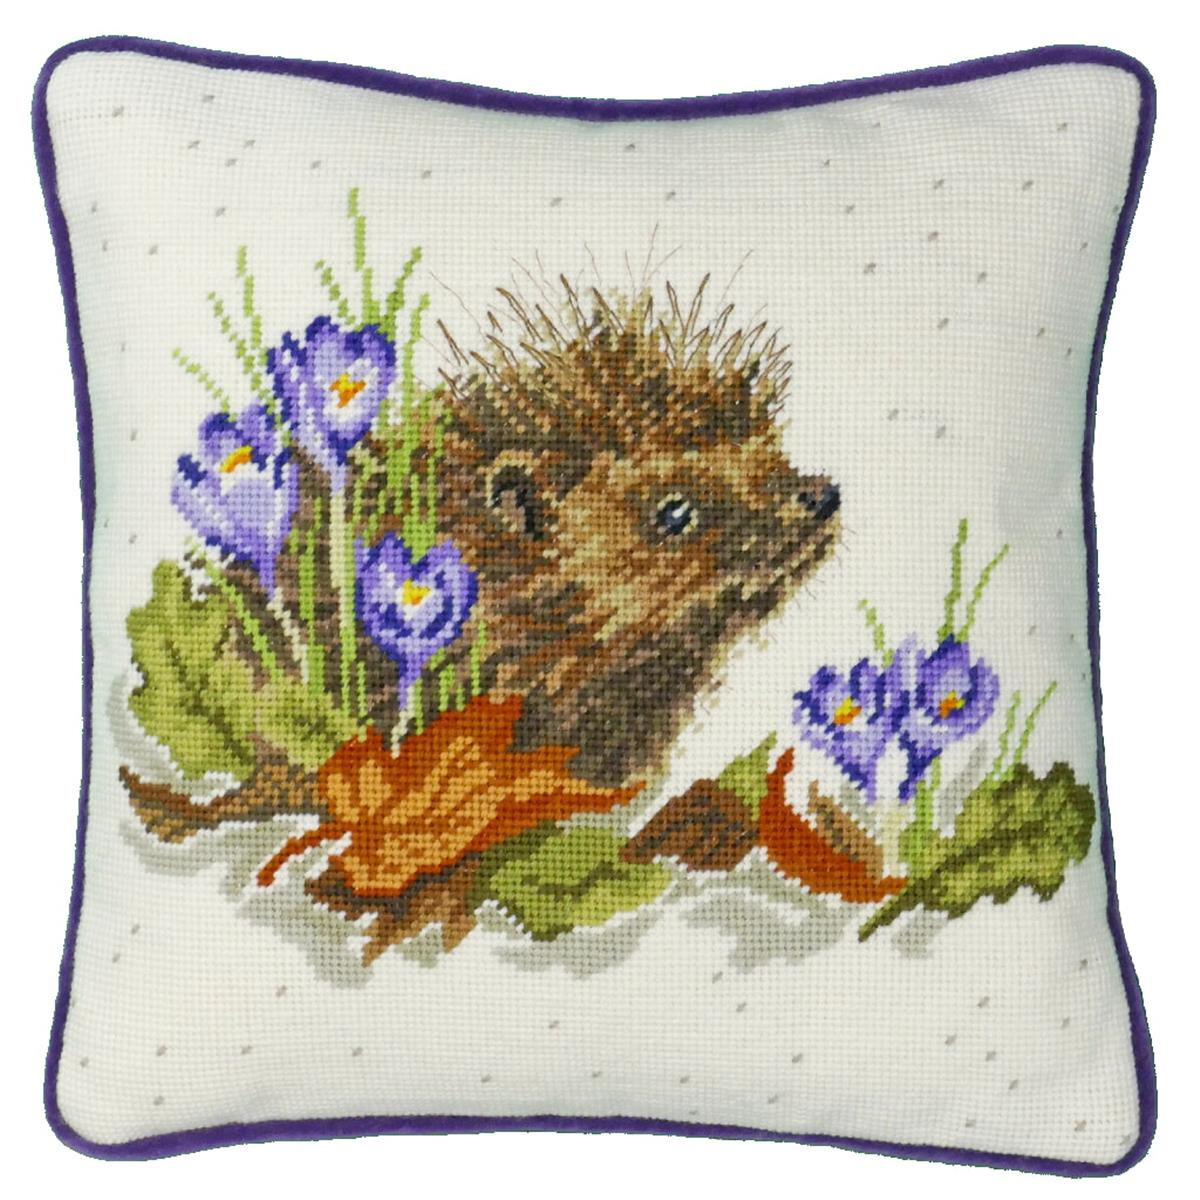 A square cushion with a purple border and an embroidery...